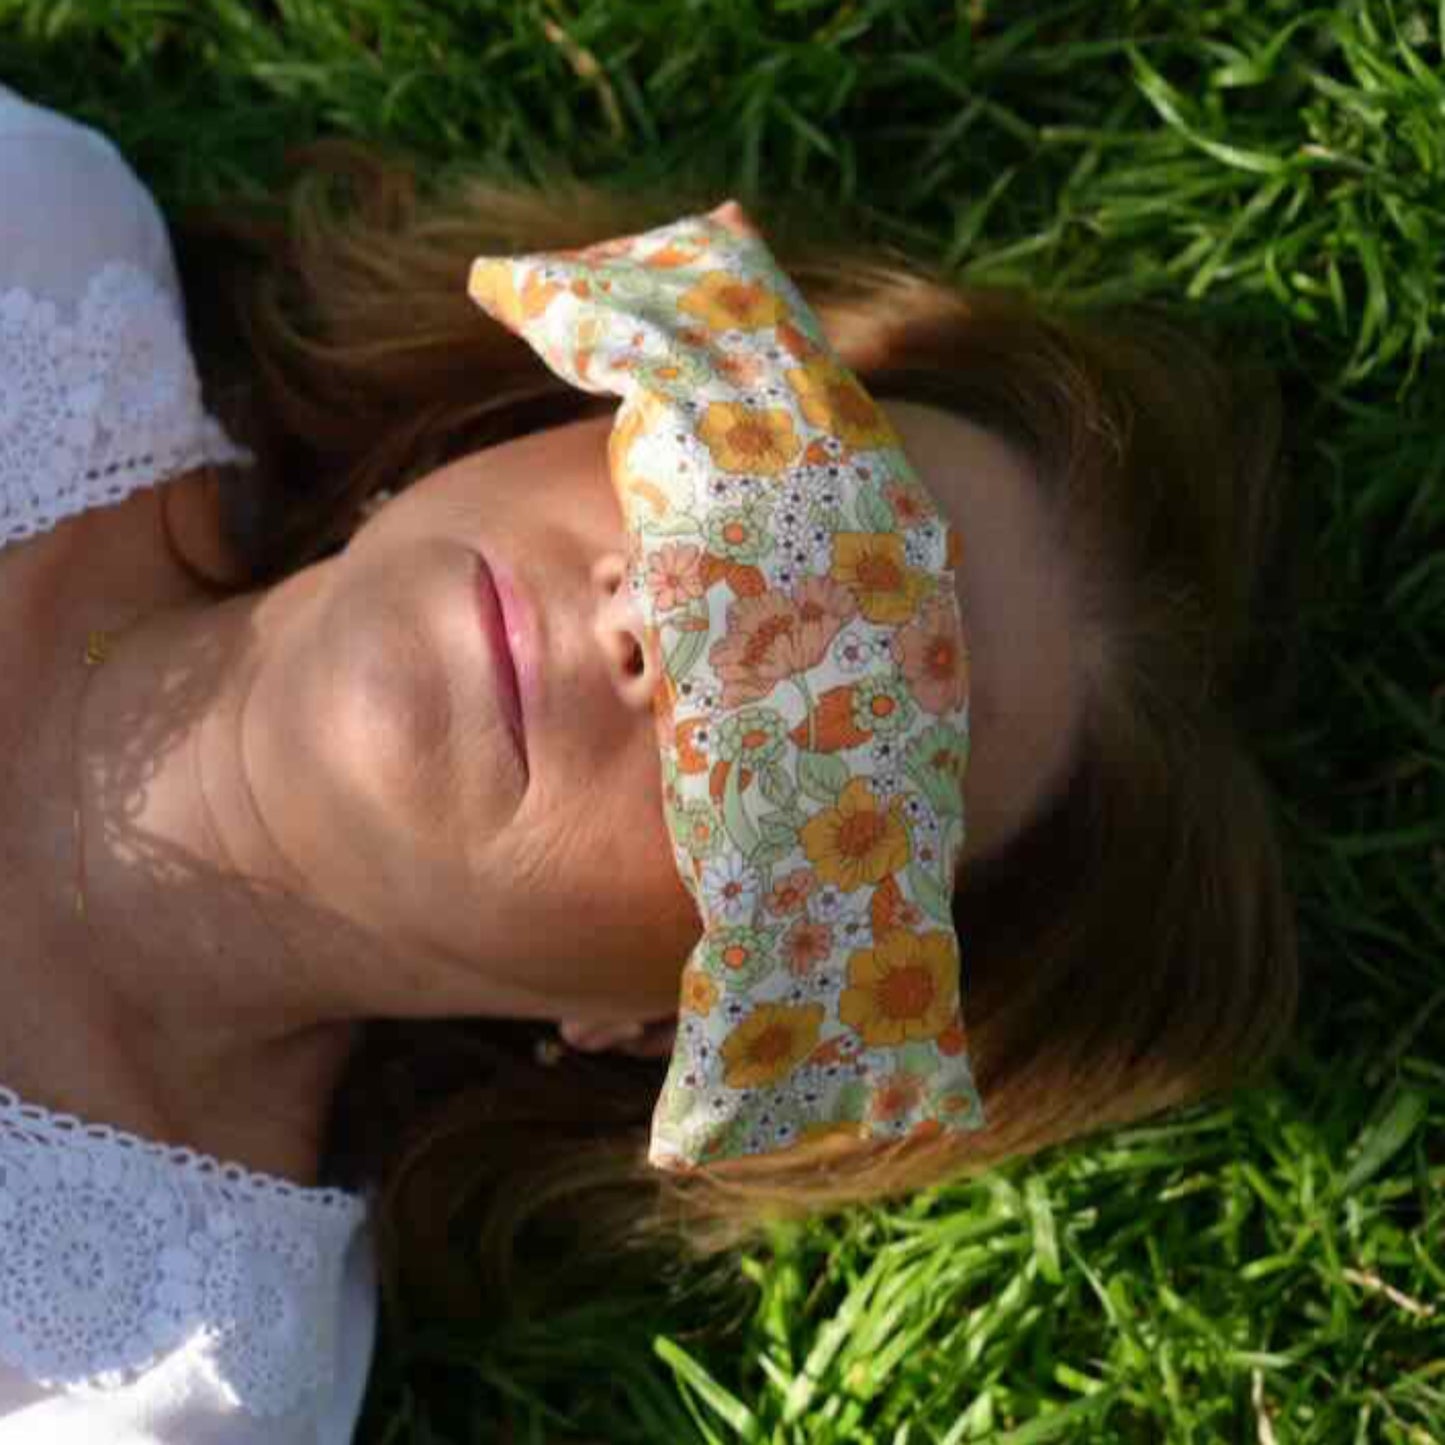 Louise with organic cotton floral print eye pillow over eyes